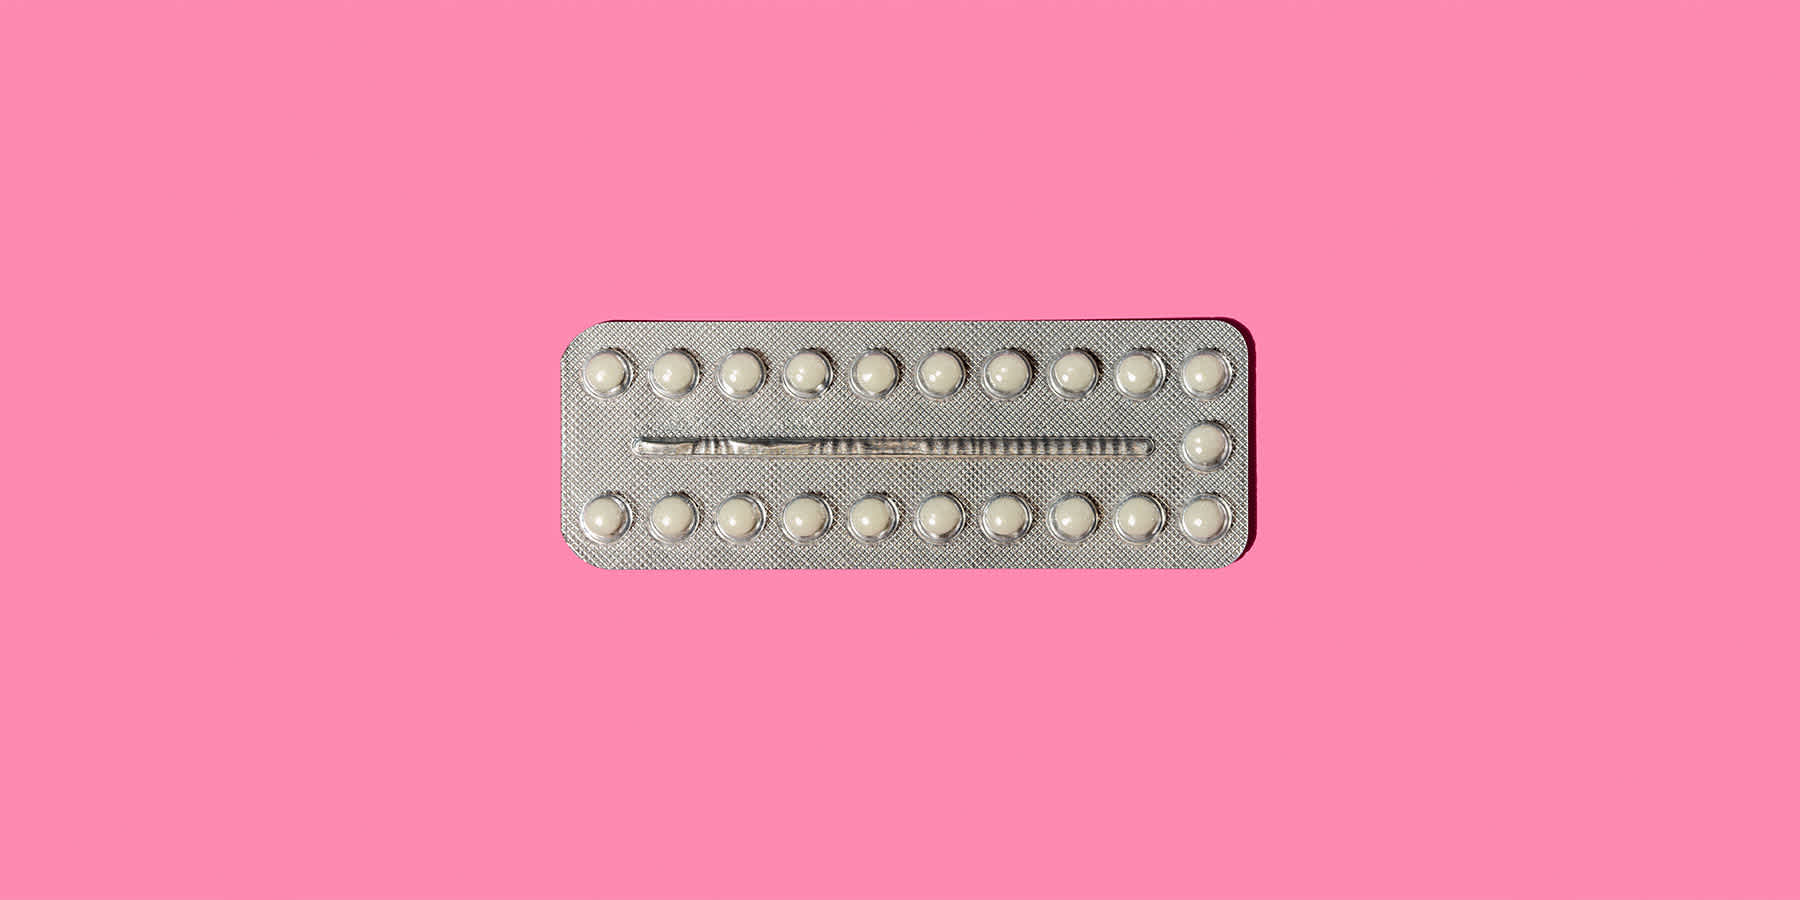 Azithromycin medication against a pink background